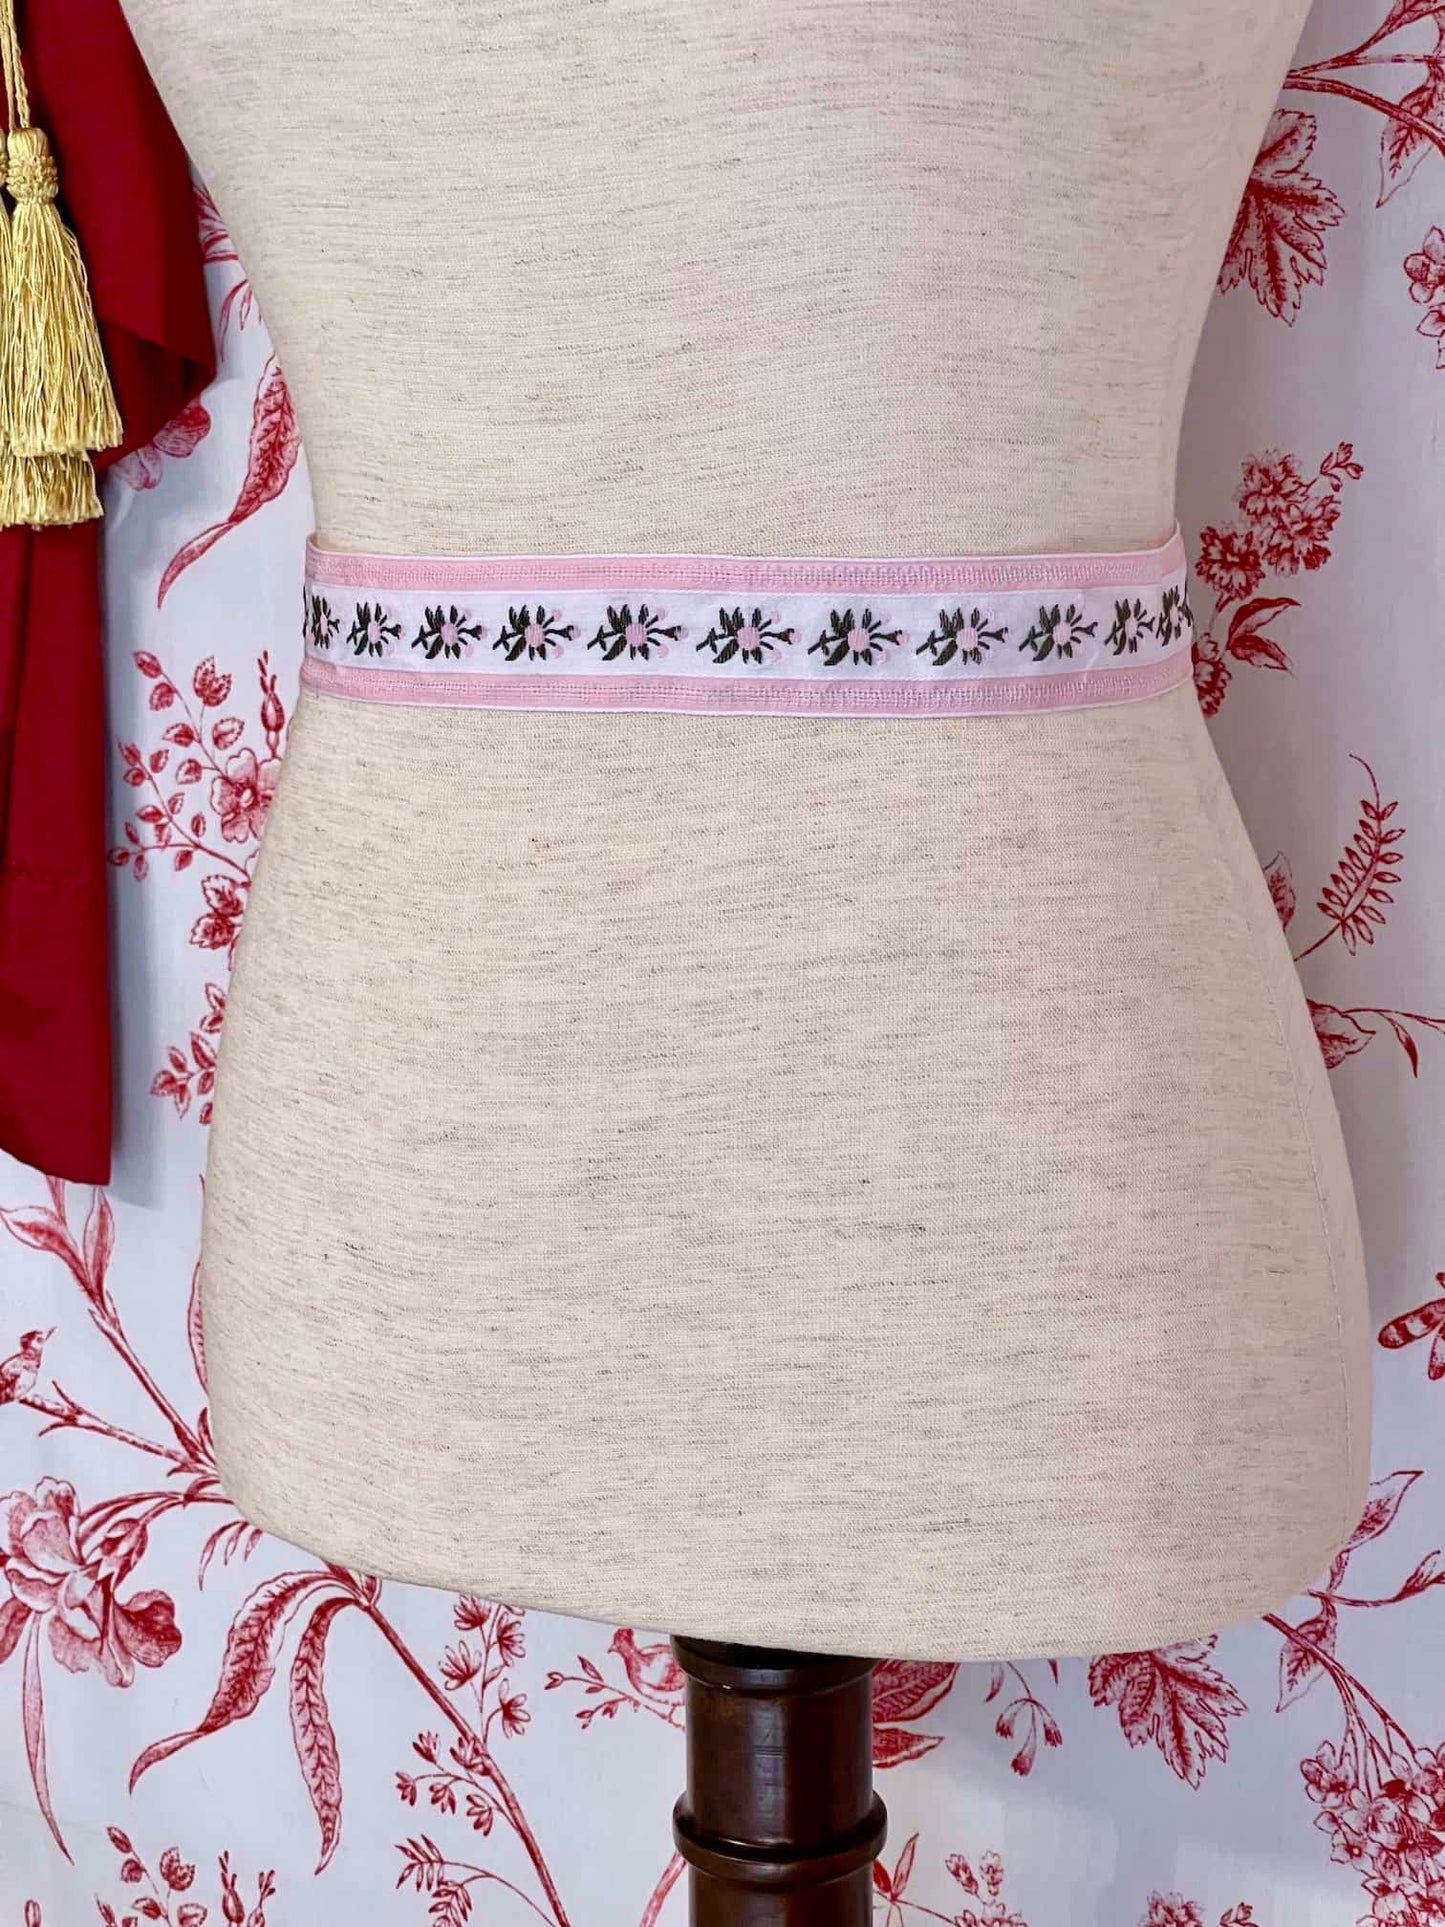 A Handmade Rococo and Regency Style Floral Ribbon Belt in Pink x White inspired by styles from the Rococo, Regency, Victorian, and Edwardian eras.